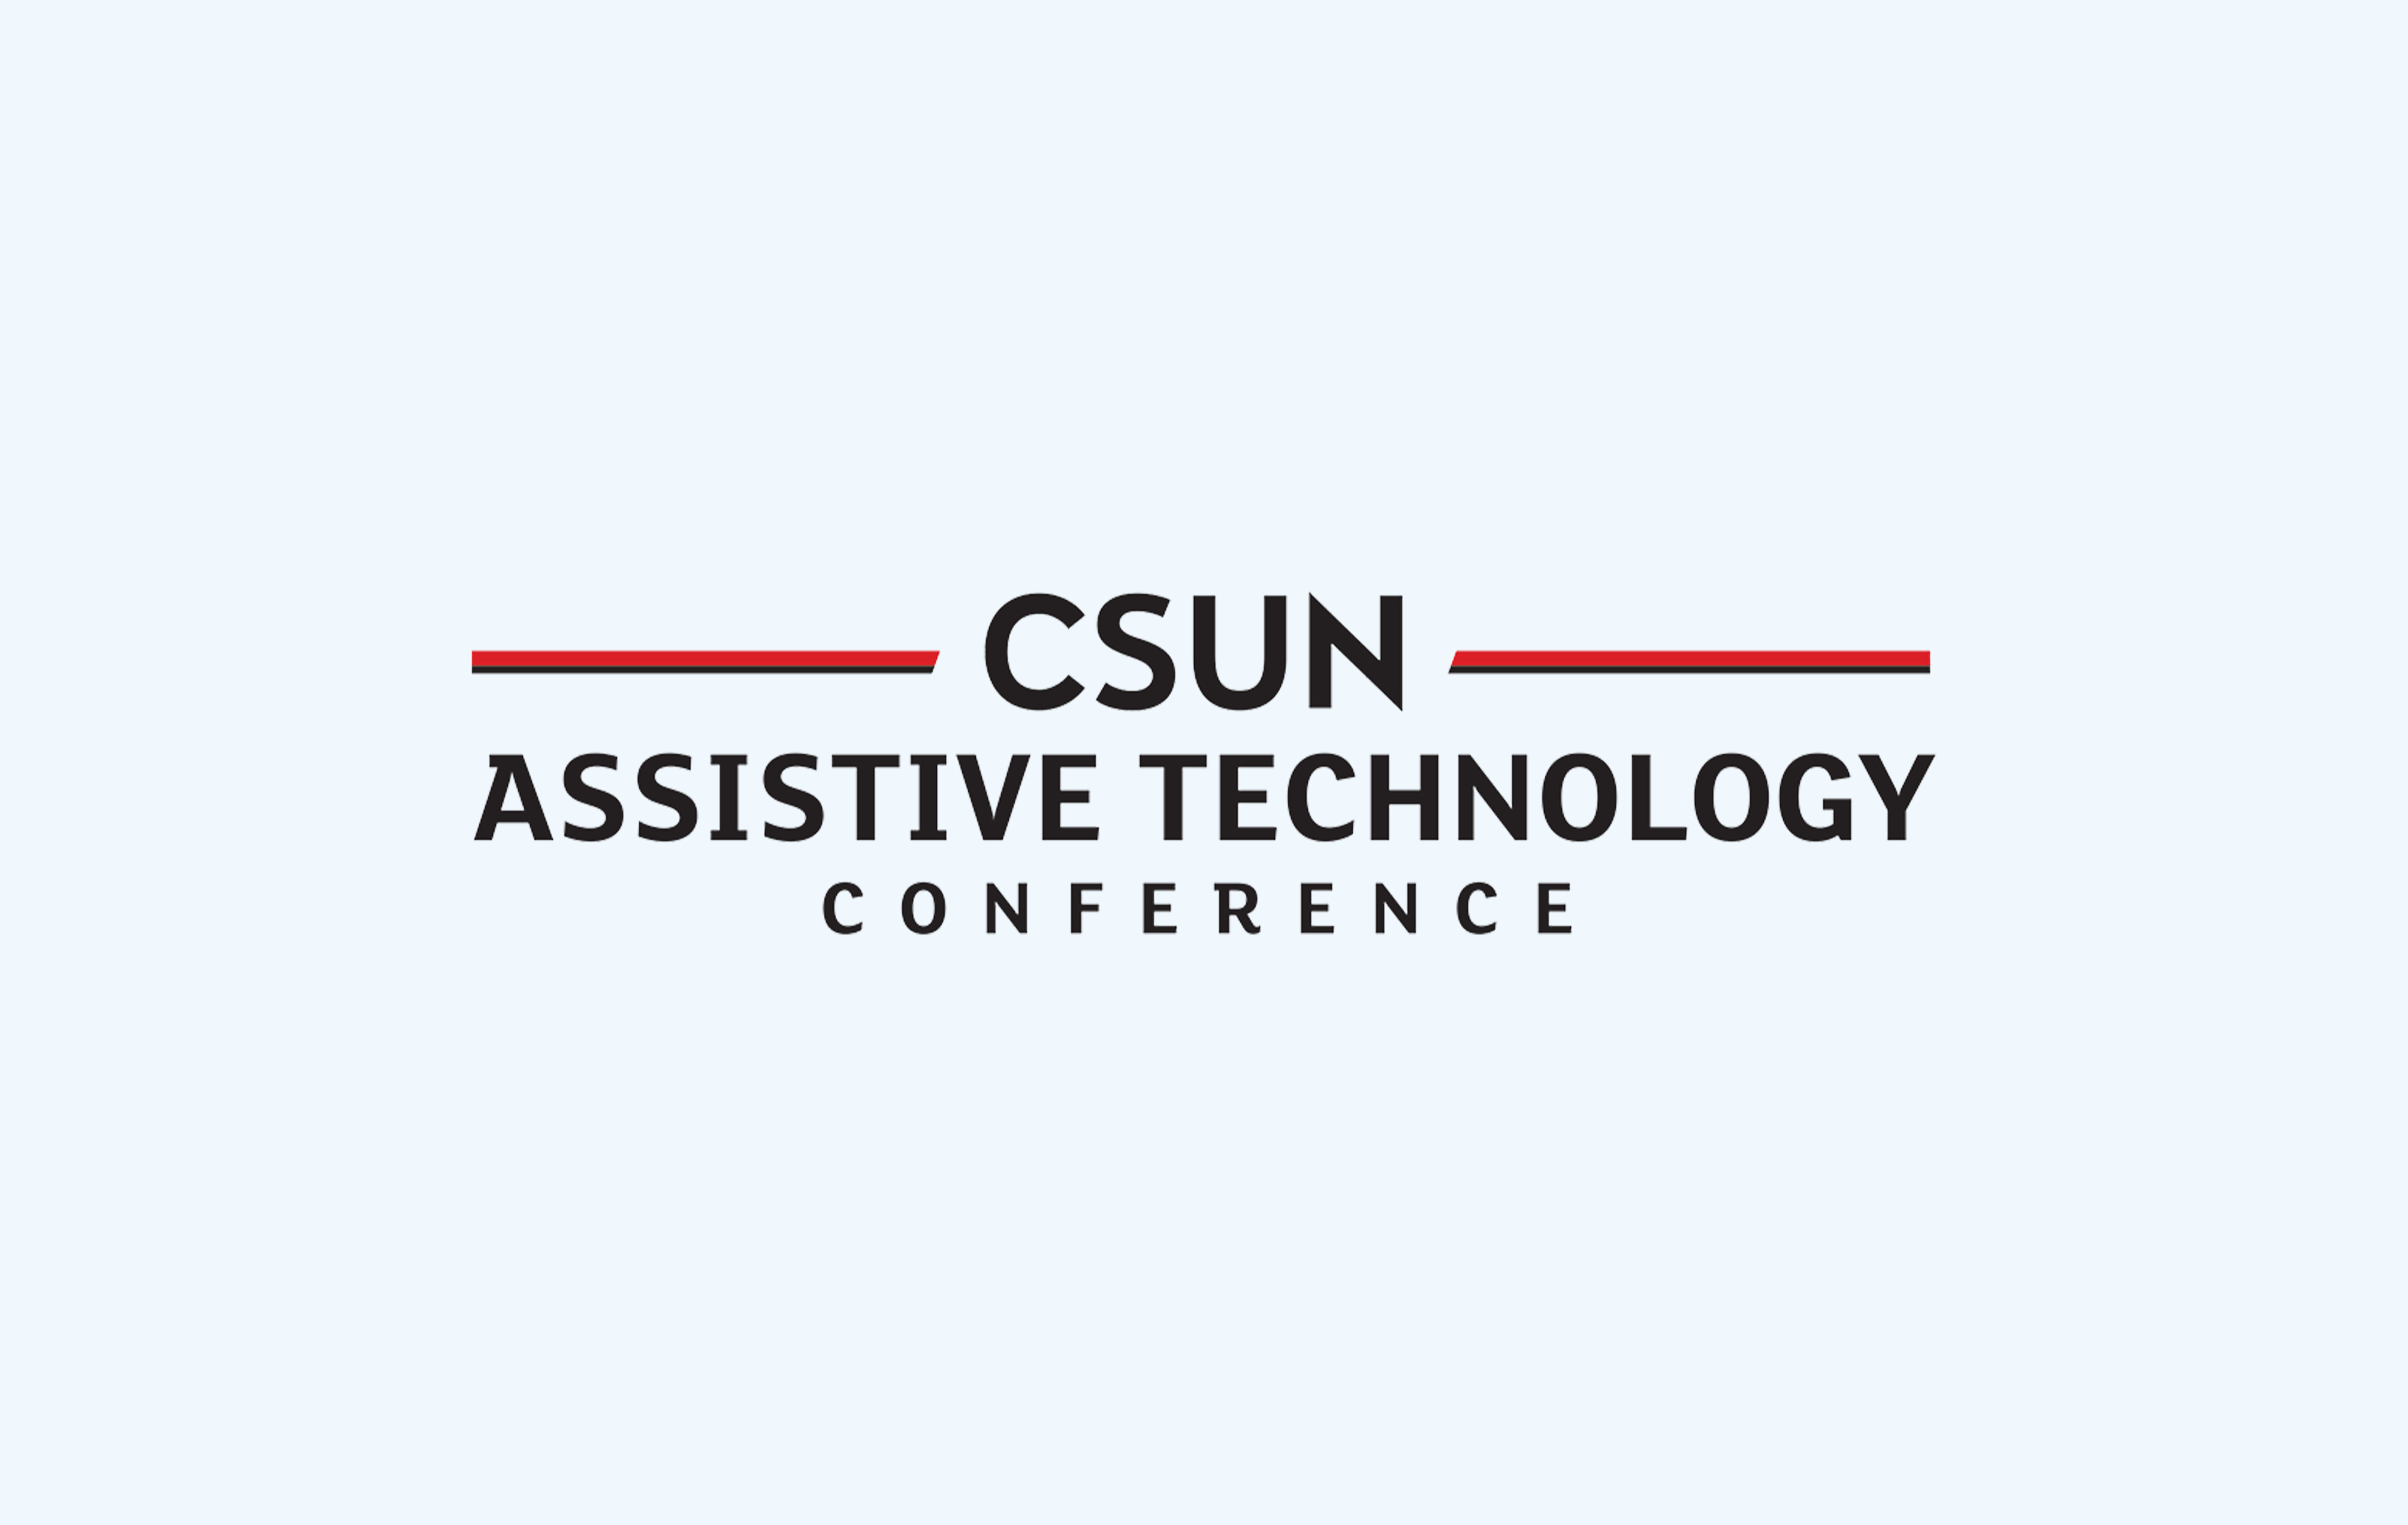 Text that says CSUN Assistive Technology Conference on a light blue background.